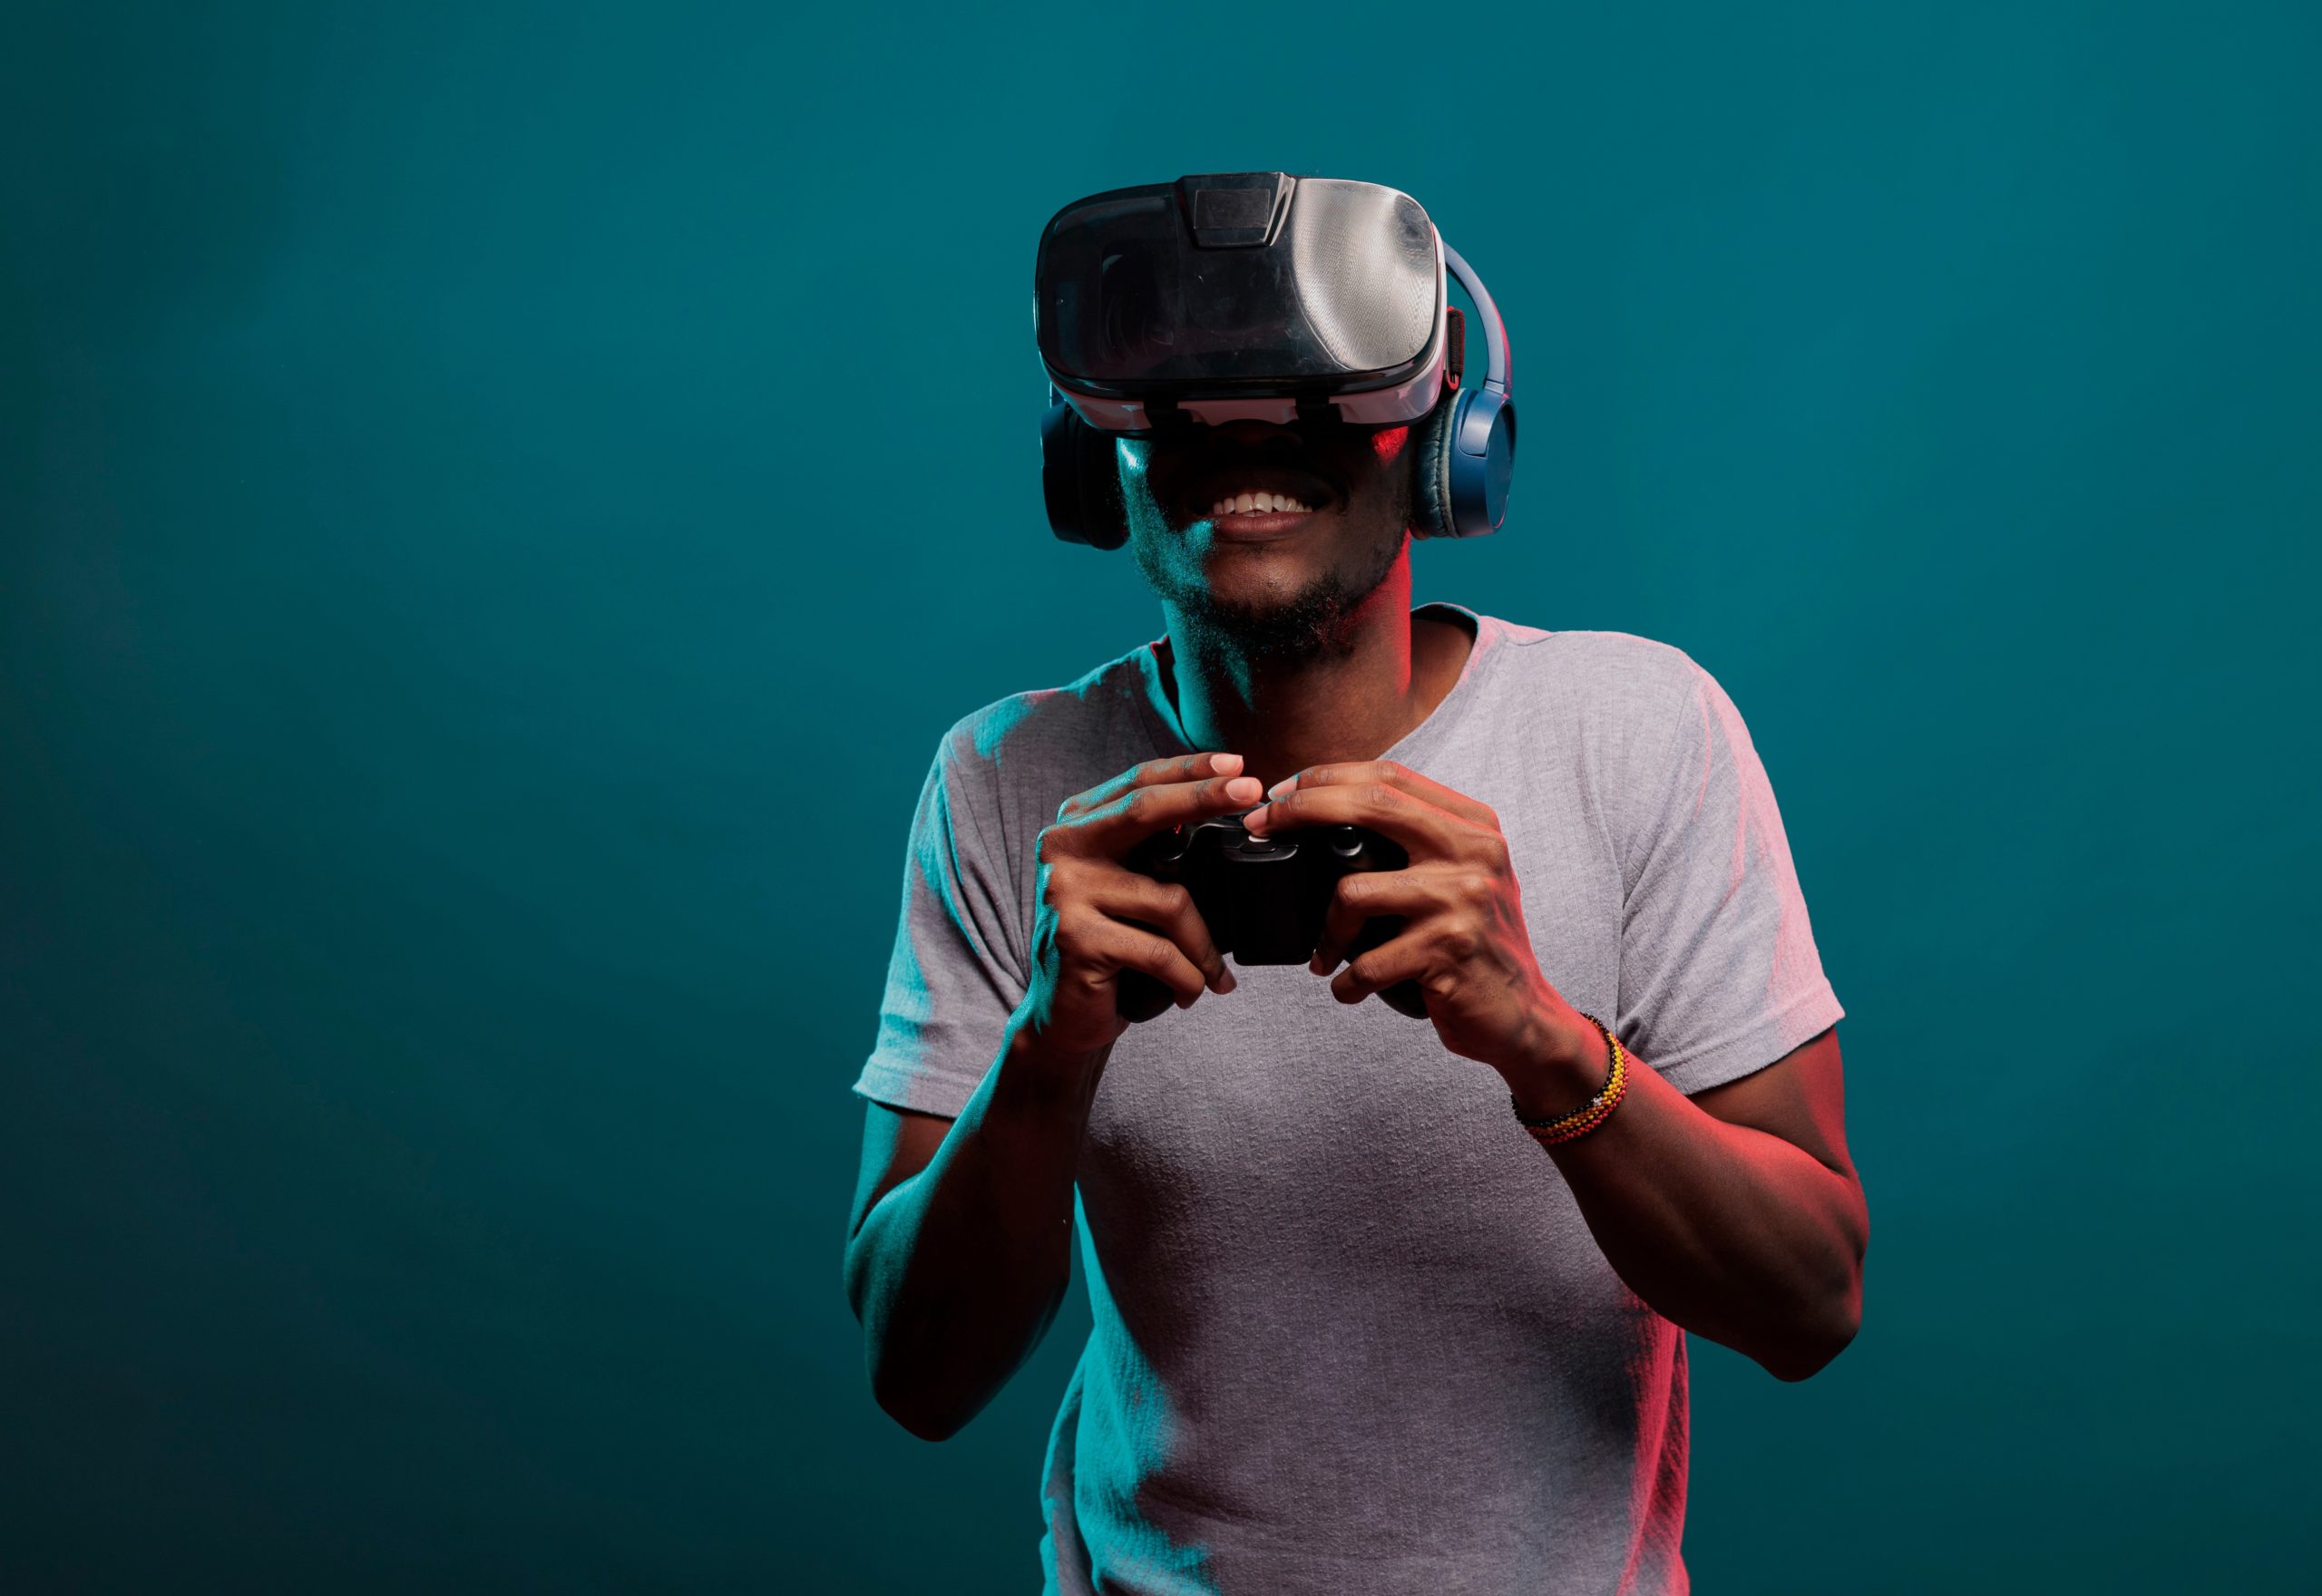 The boom of virtual reality video games